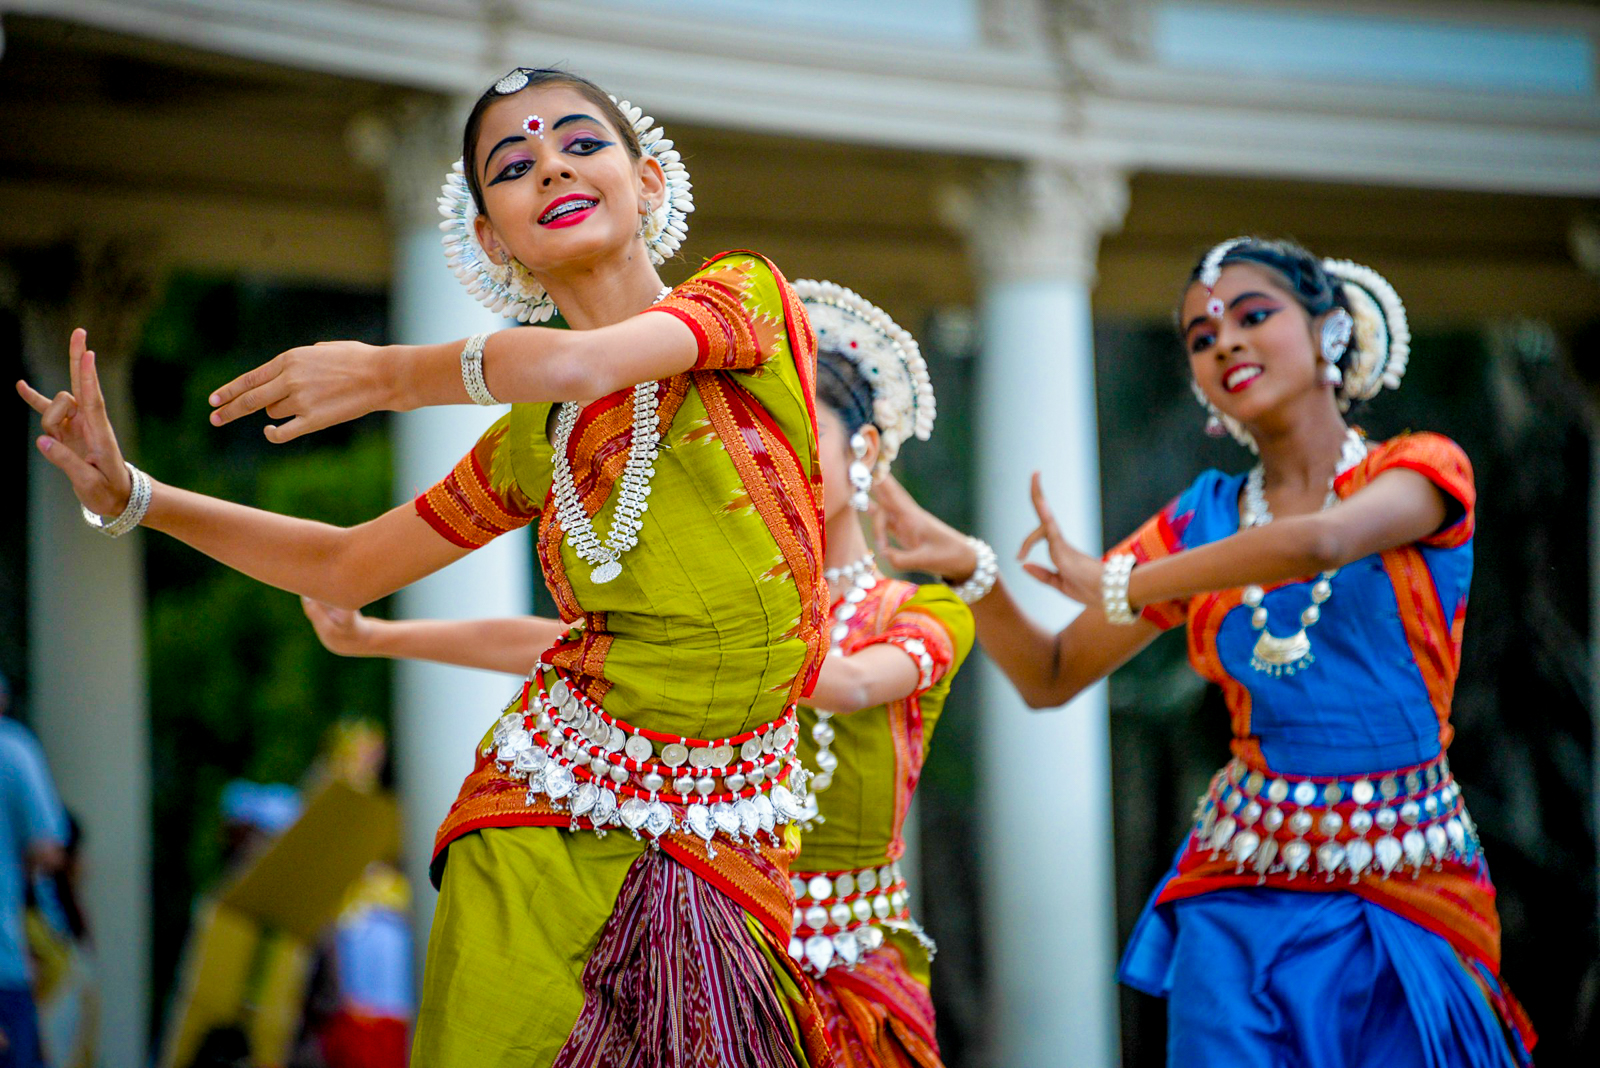 Two women Bollywood dancing in India